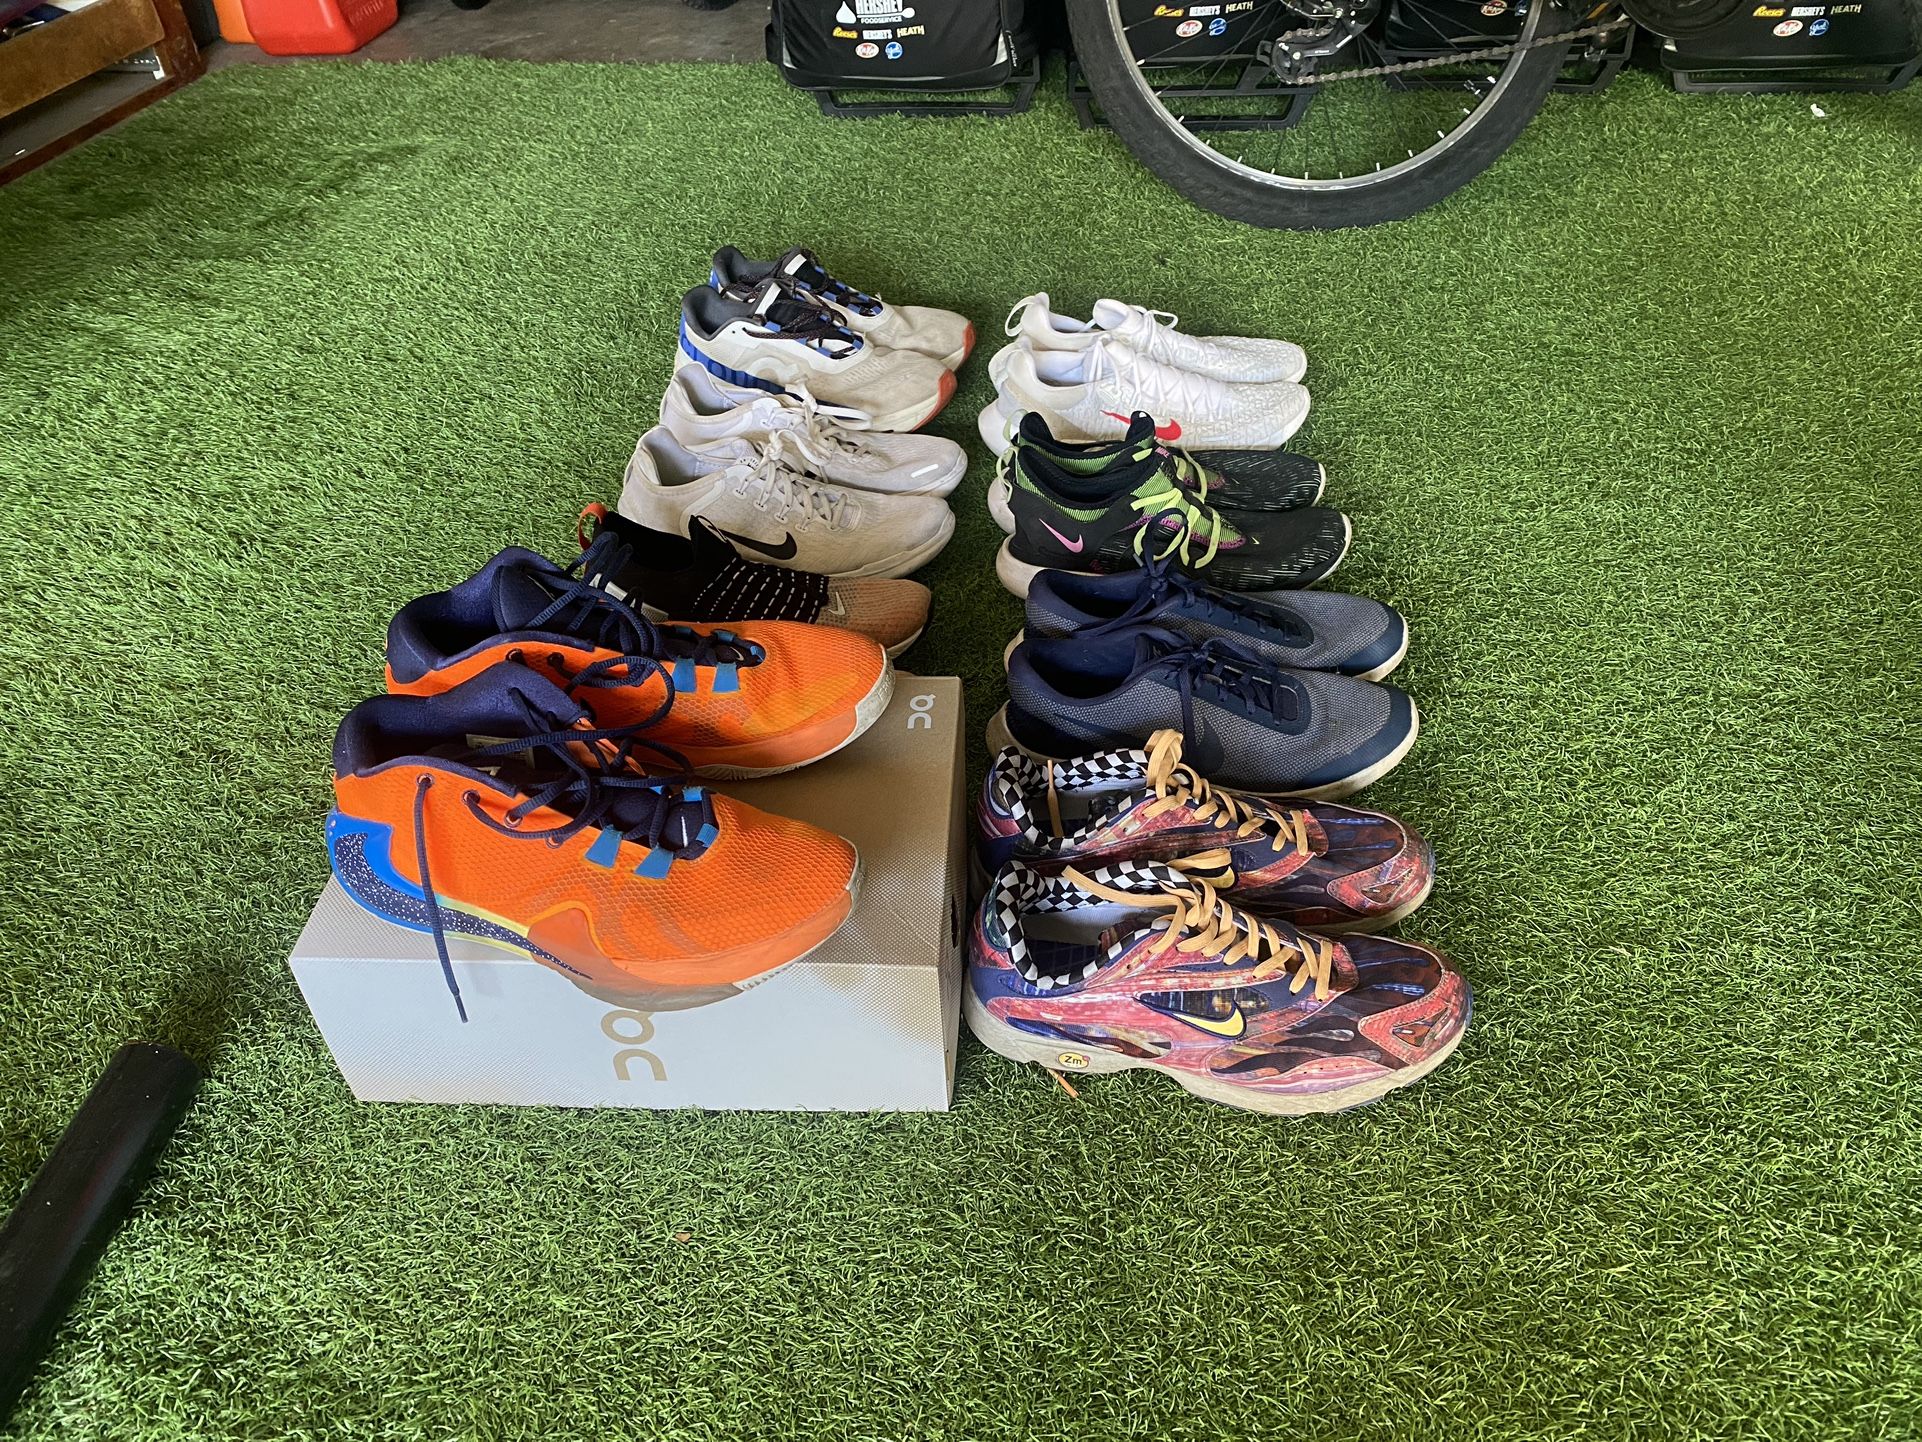 Men’s Size 10 Athletic Shoes $200 For All